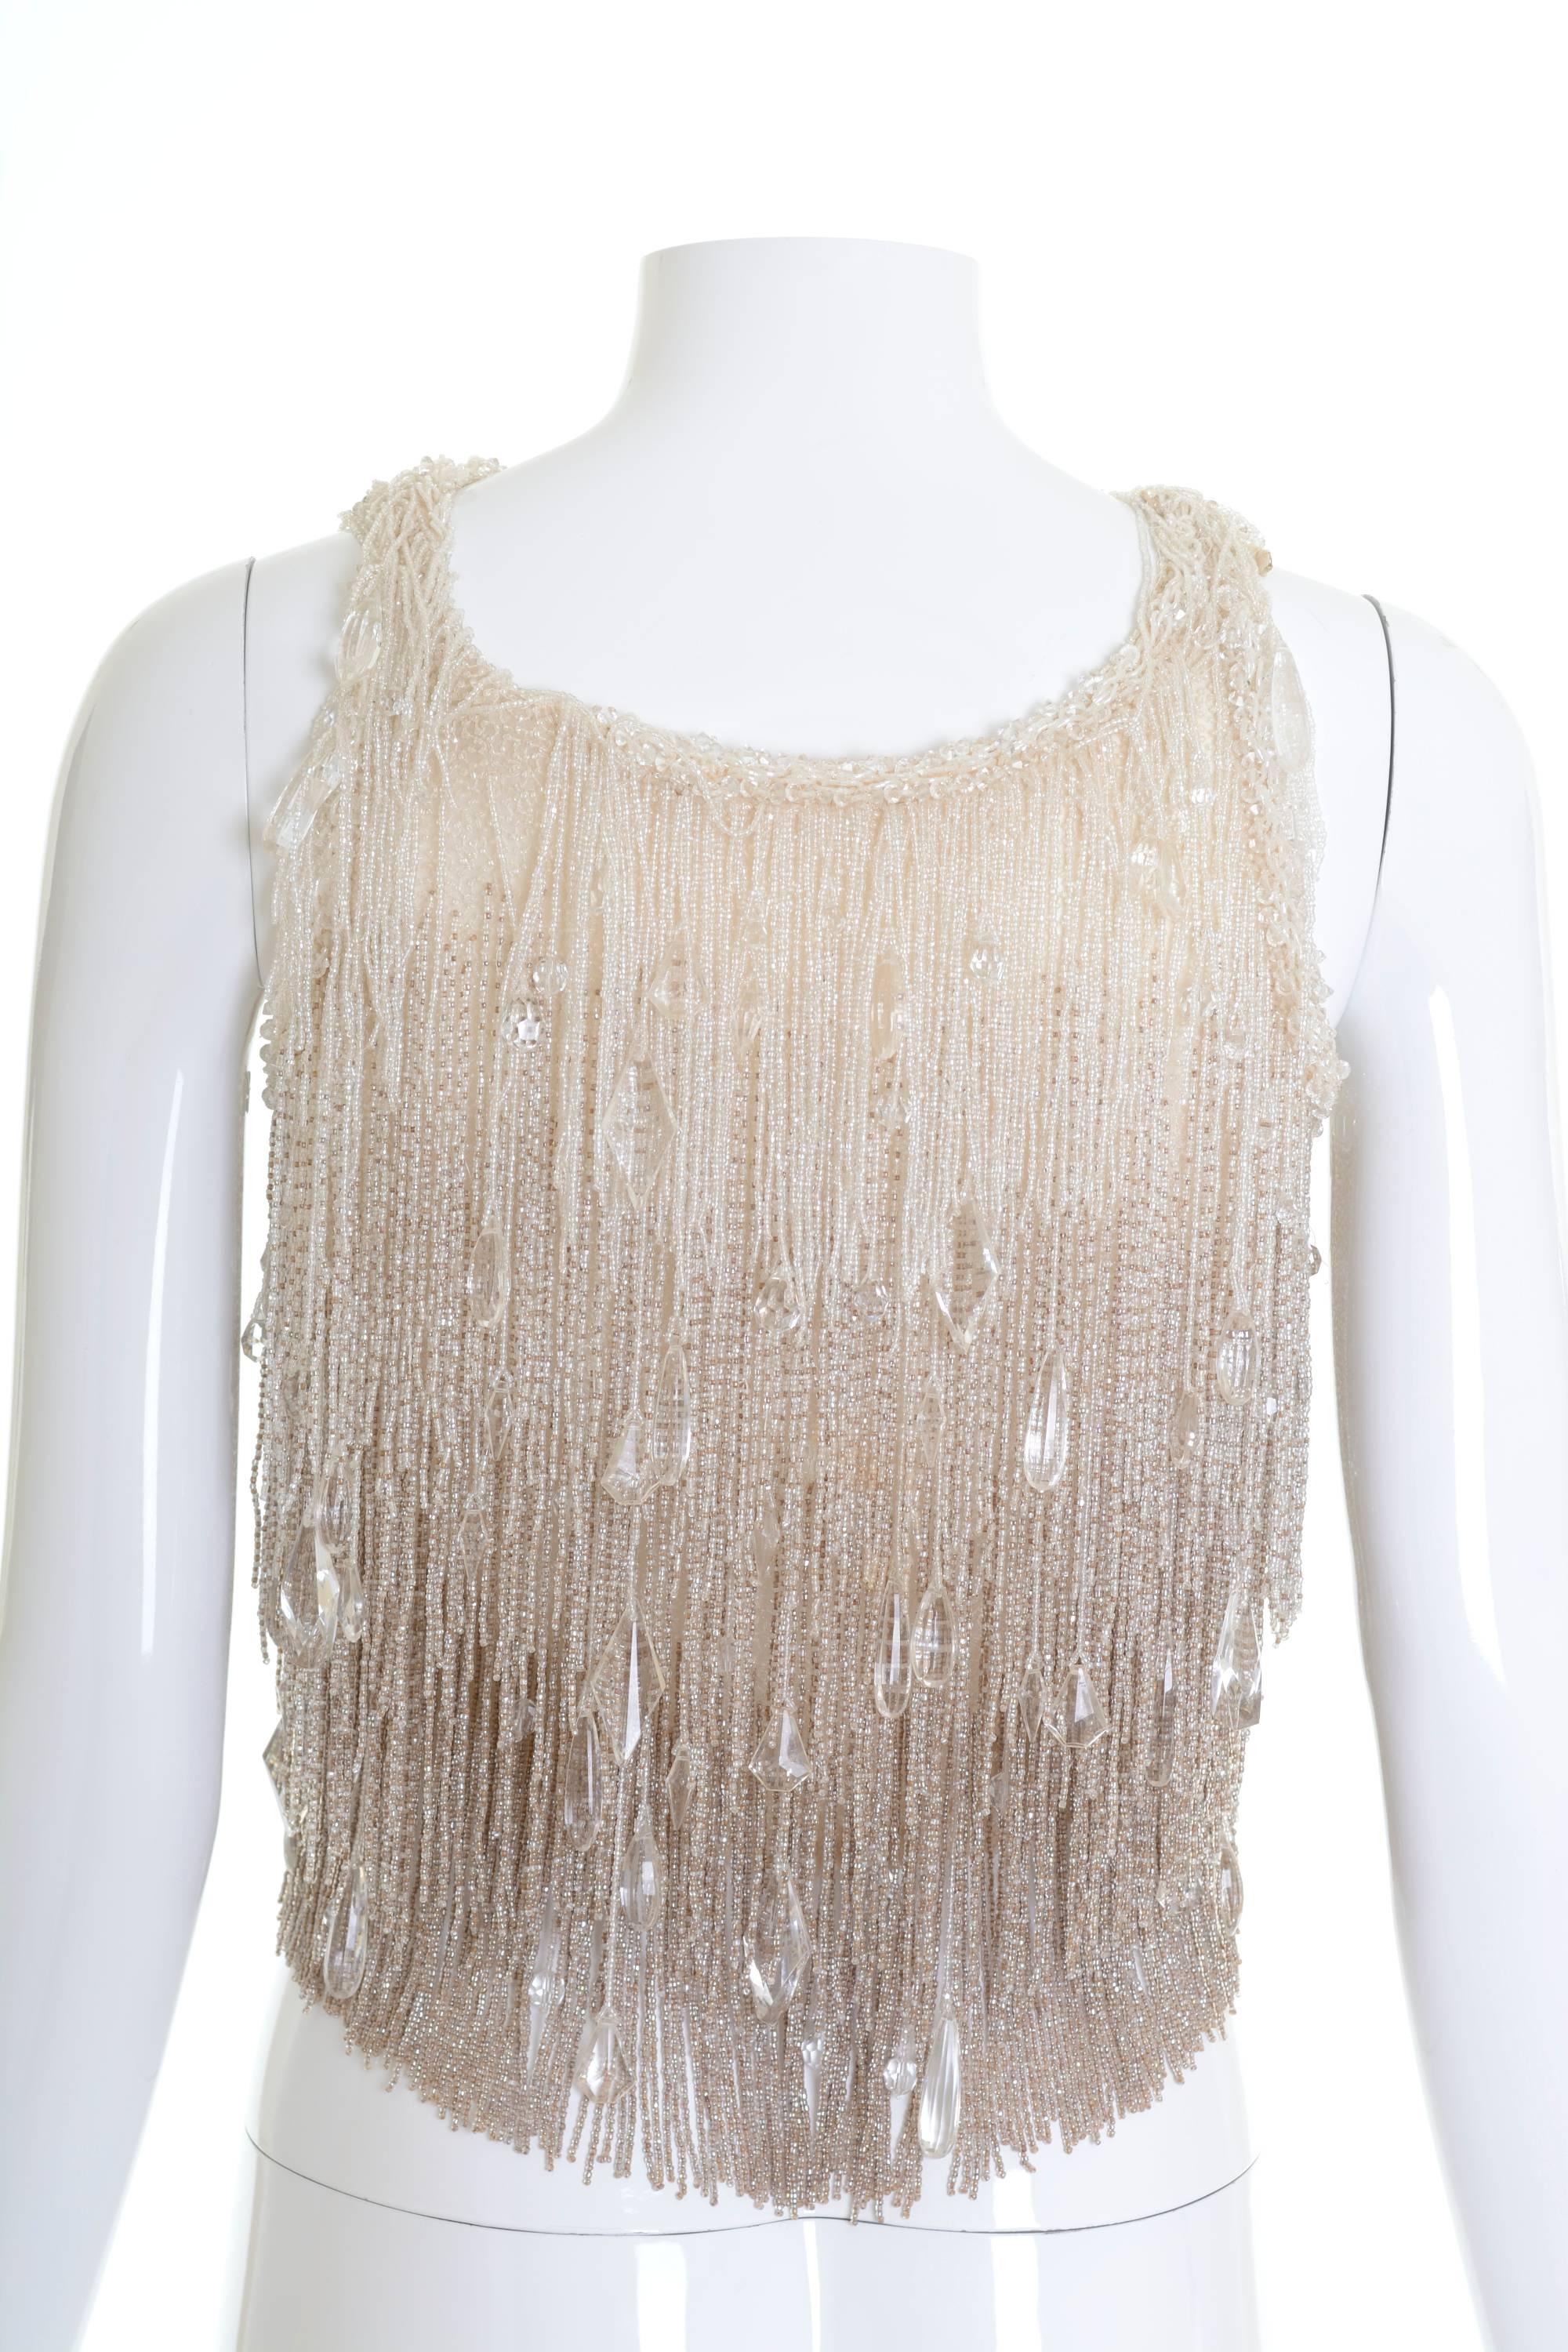 This amazing 1920s top is in a fabulous cream shades silk fabric with amazing heavily glass beadeds fringes. It has side snaps closure and is fully lined.

Good vintage condition

Label: N/A
Fabric: silk/beadeds
Color: cream

Measurement:
Estimeted